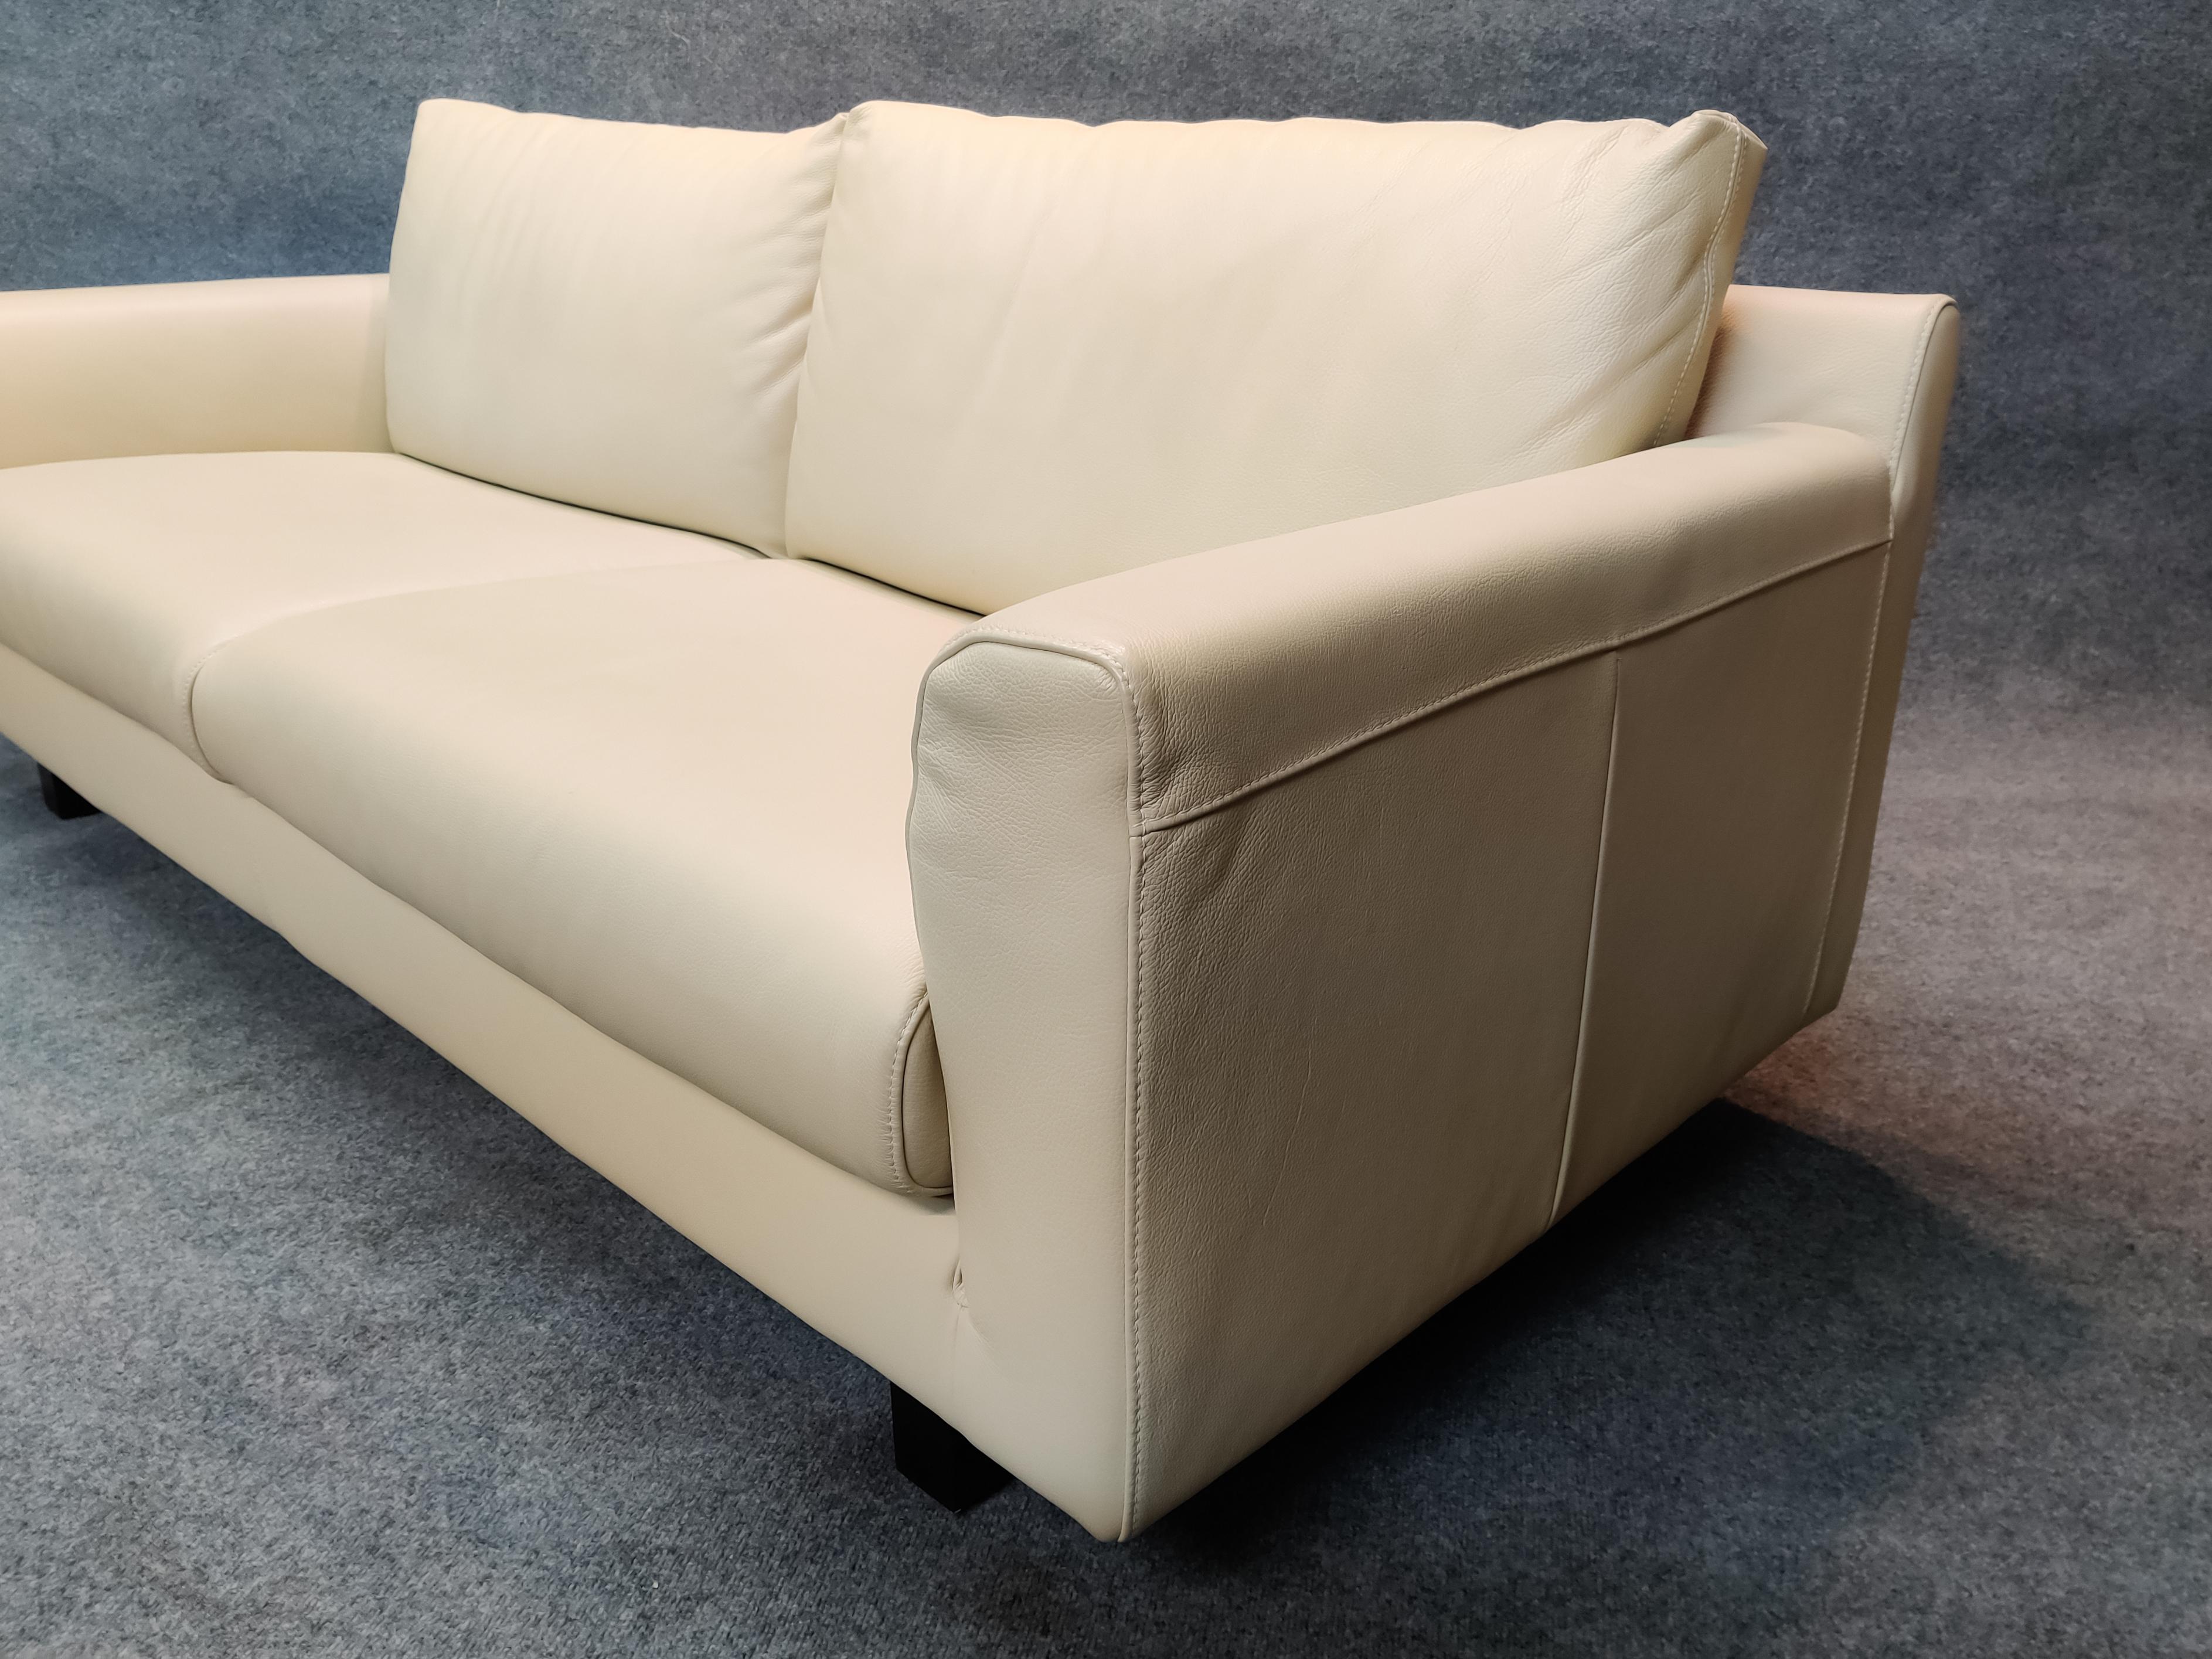 Post-Modern & Sleek Fine Top-Grain Off-White Leather Sofa by Nicoletti of Italy 1